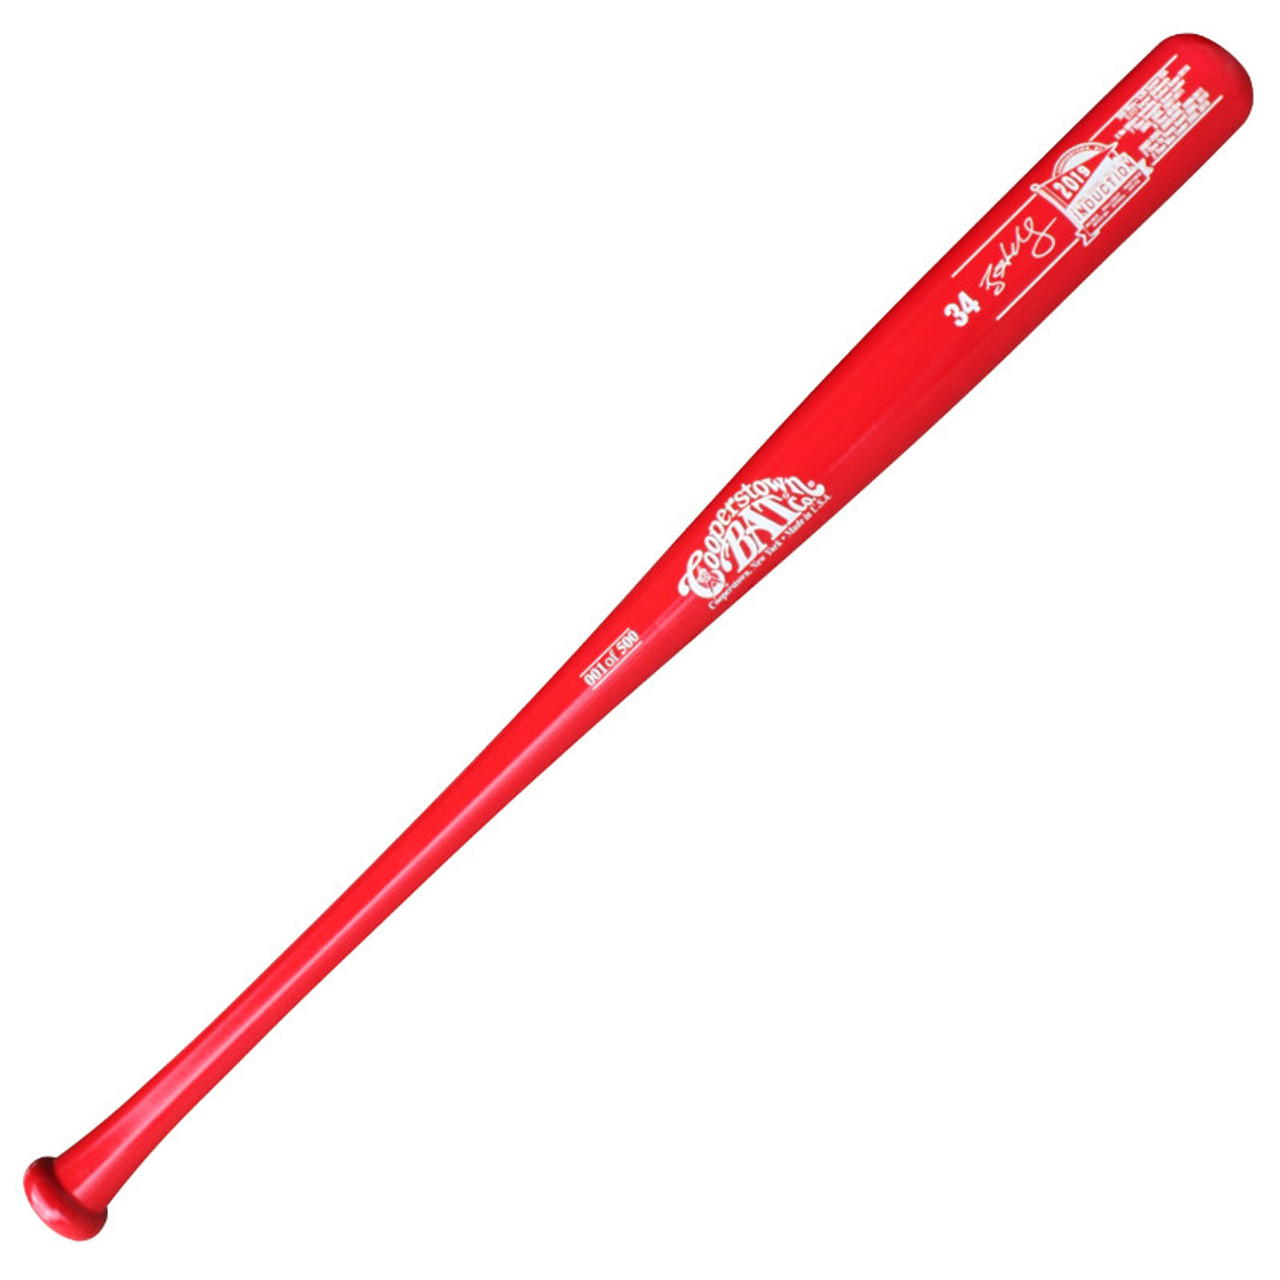 Roy Halladay Baseball Hall of Fame 2019 Induction Limited Edition Full Size  34 Career Stat Bat - Red